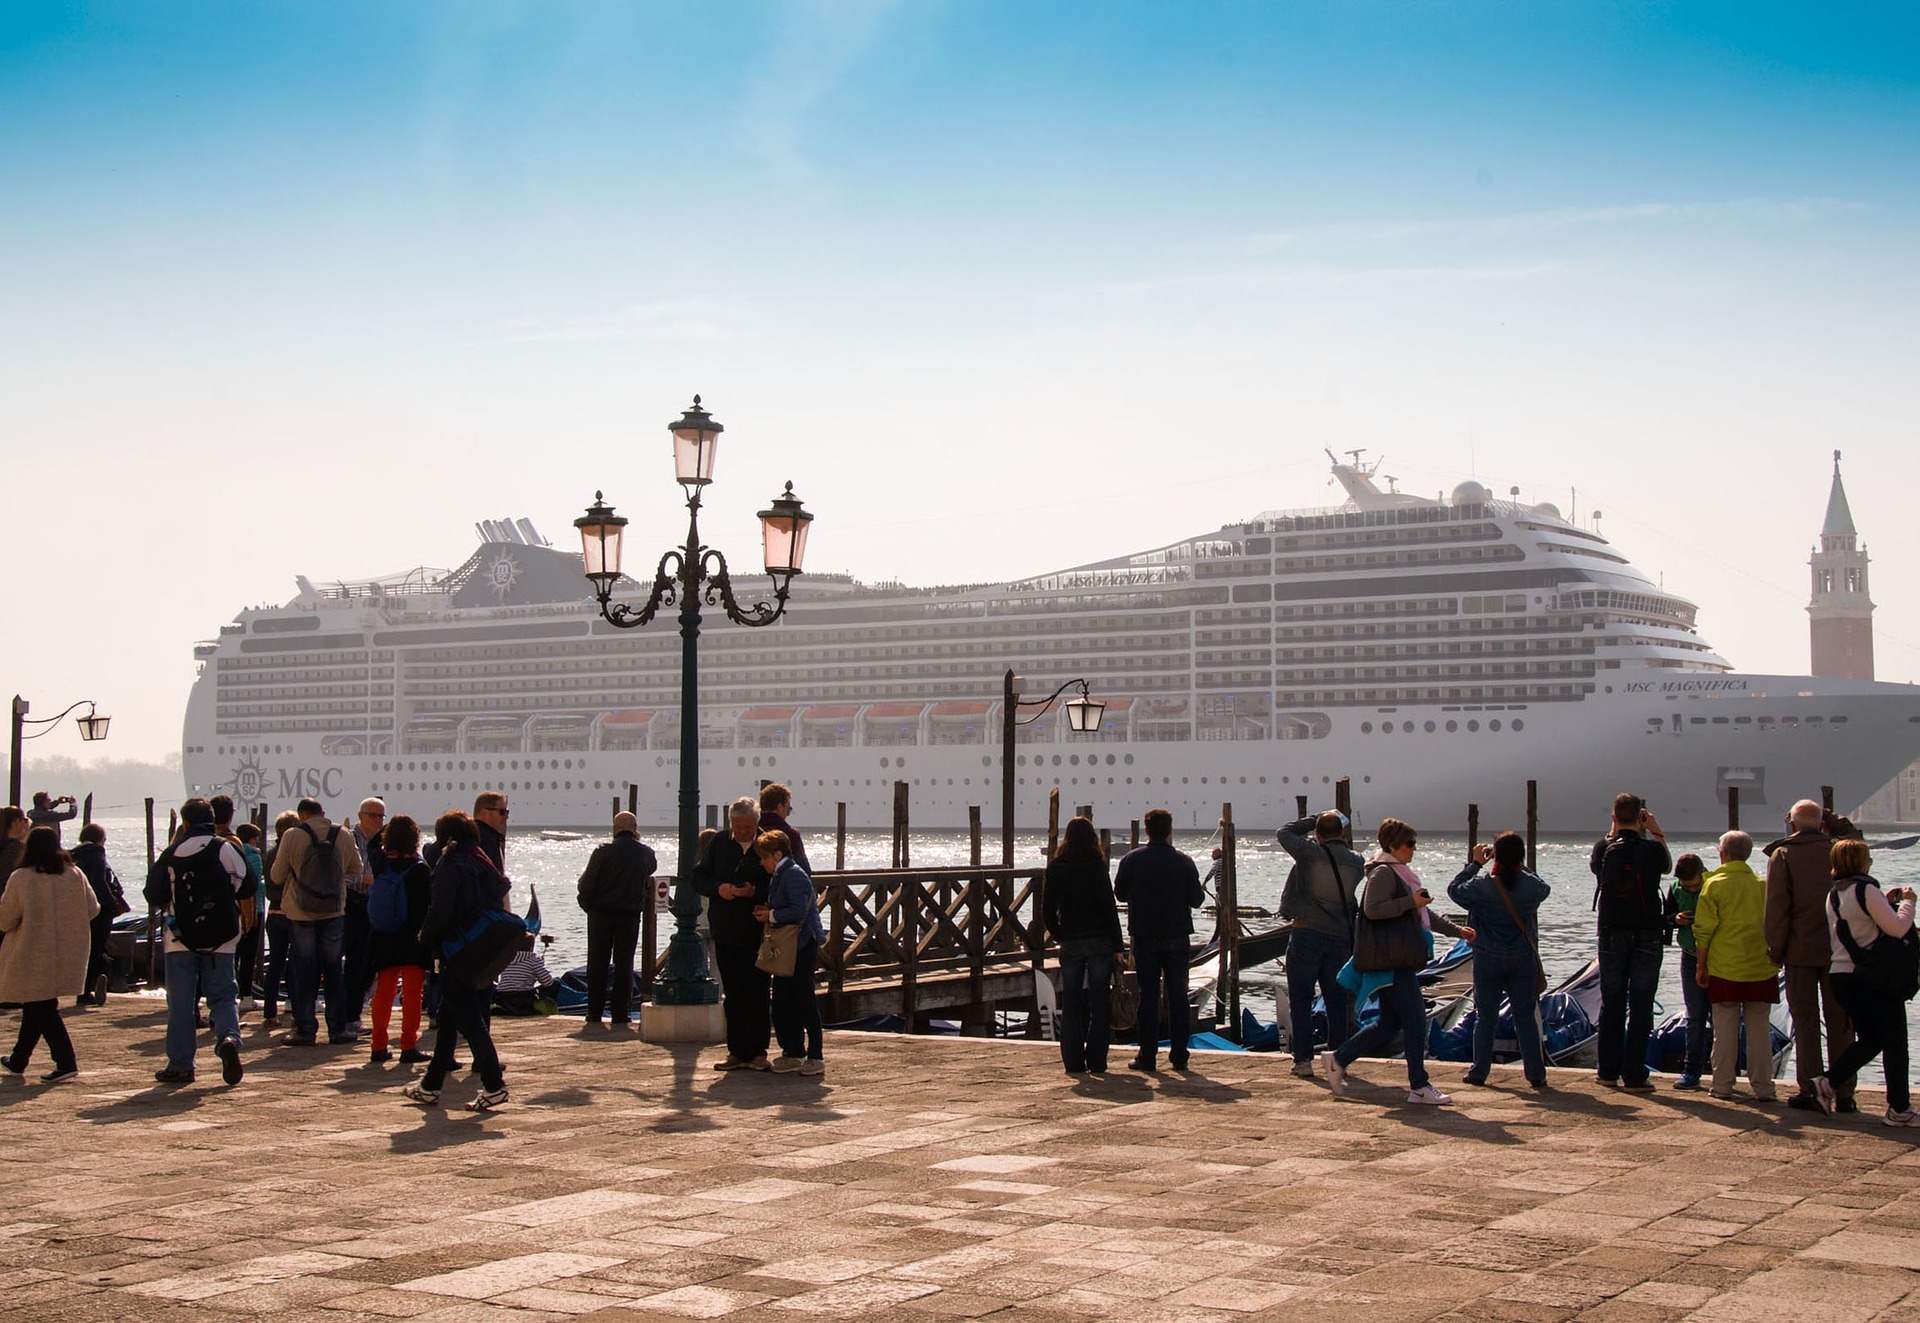 Venice, Italy and large cruise ship